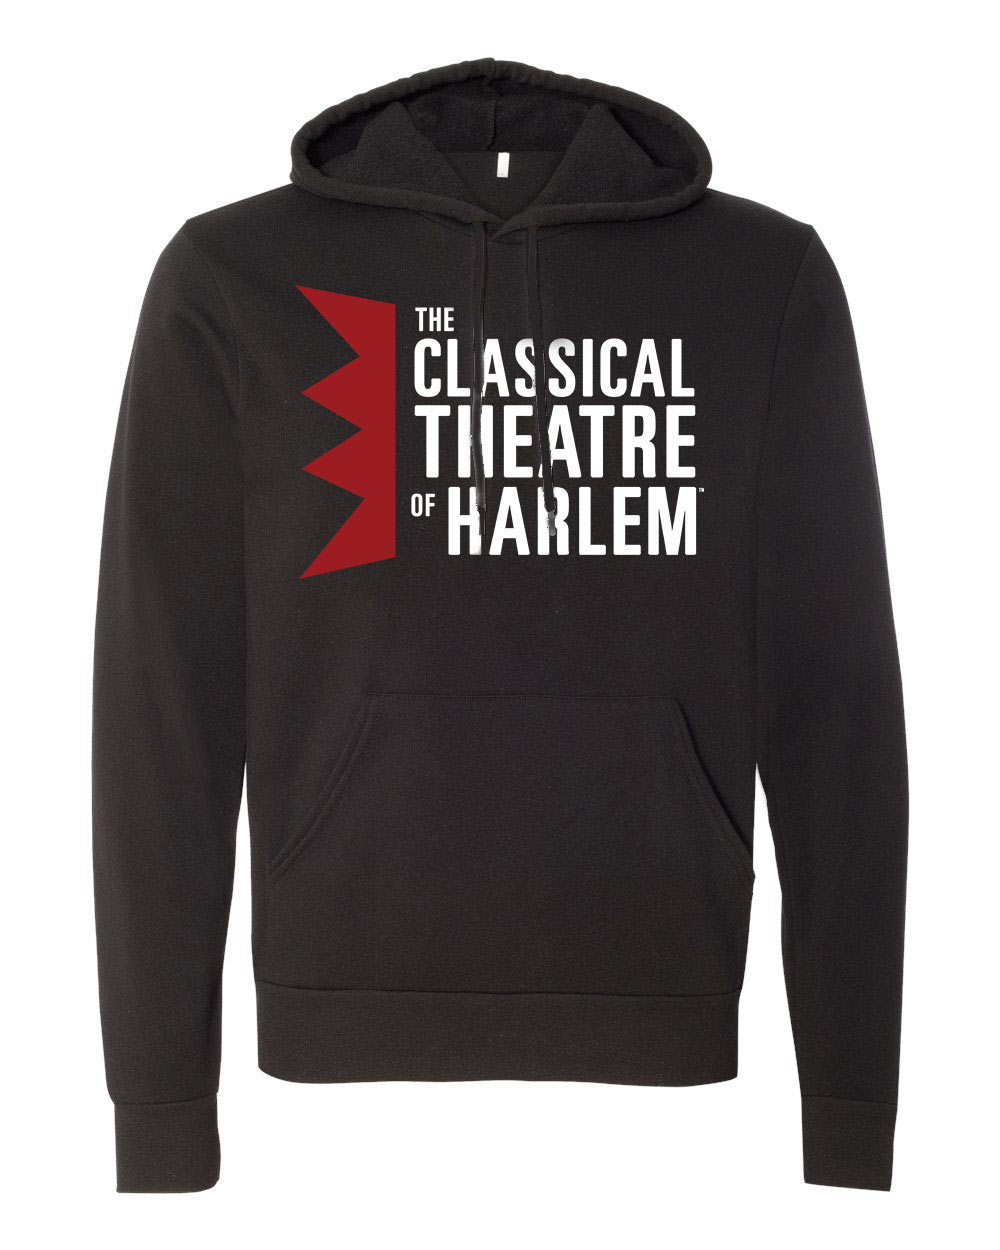 Black Hoodie - Red Logo - The Classical Theatre of Harlem